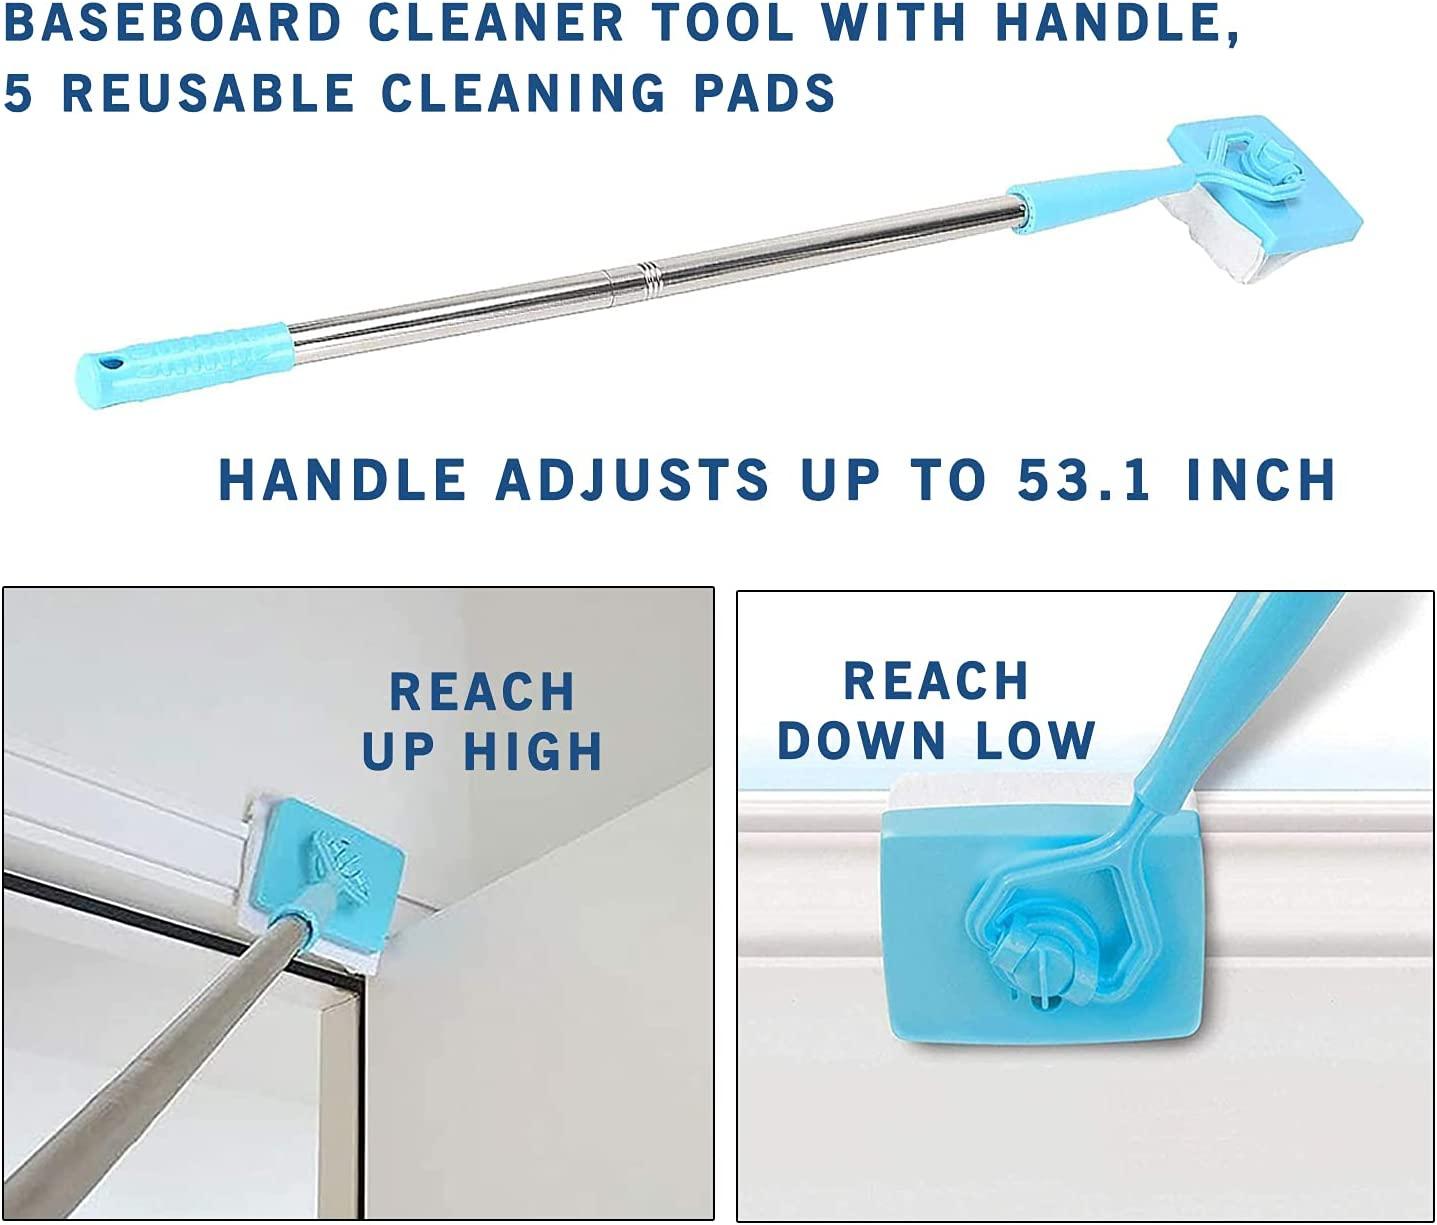 Baseboard Cleaner Tool with Handle Reusable Mop Cleaning Pad with